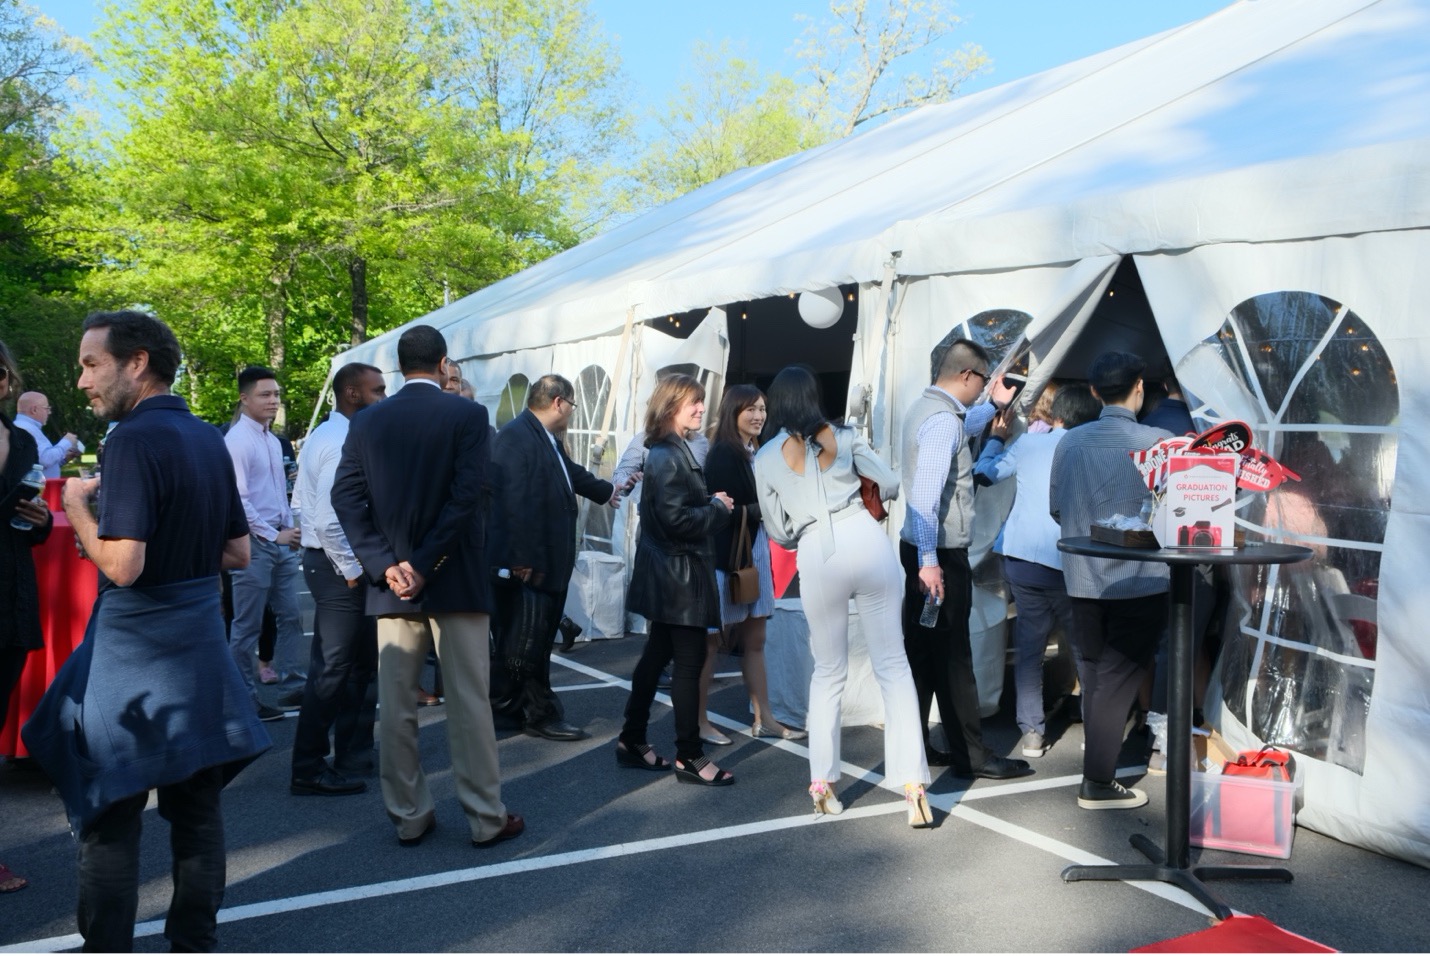 crowd of graduate students mingling outside white canopied tent under blue skies